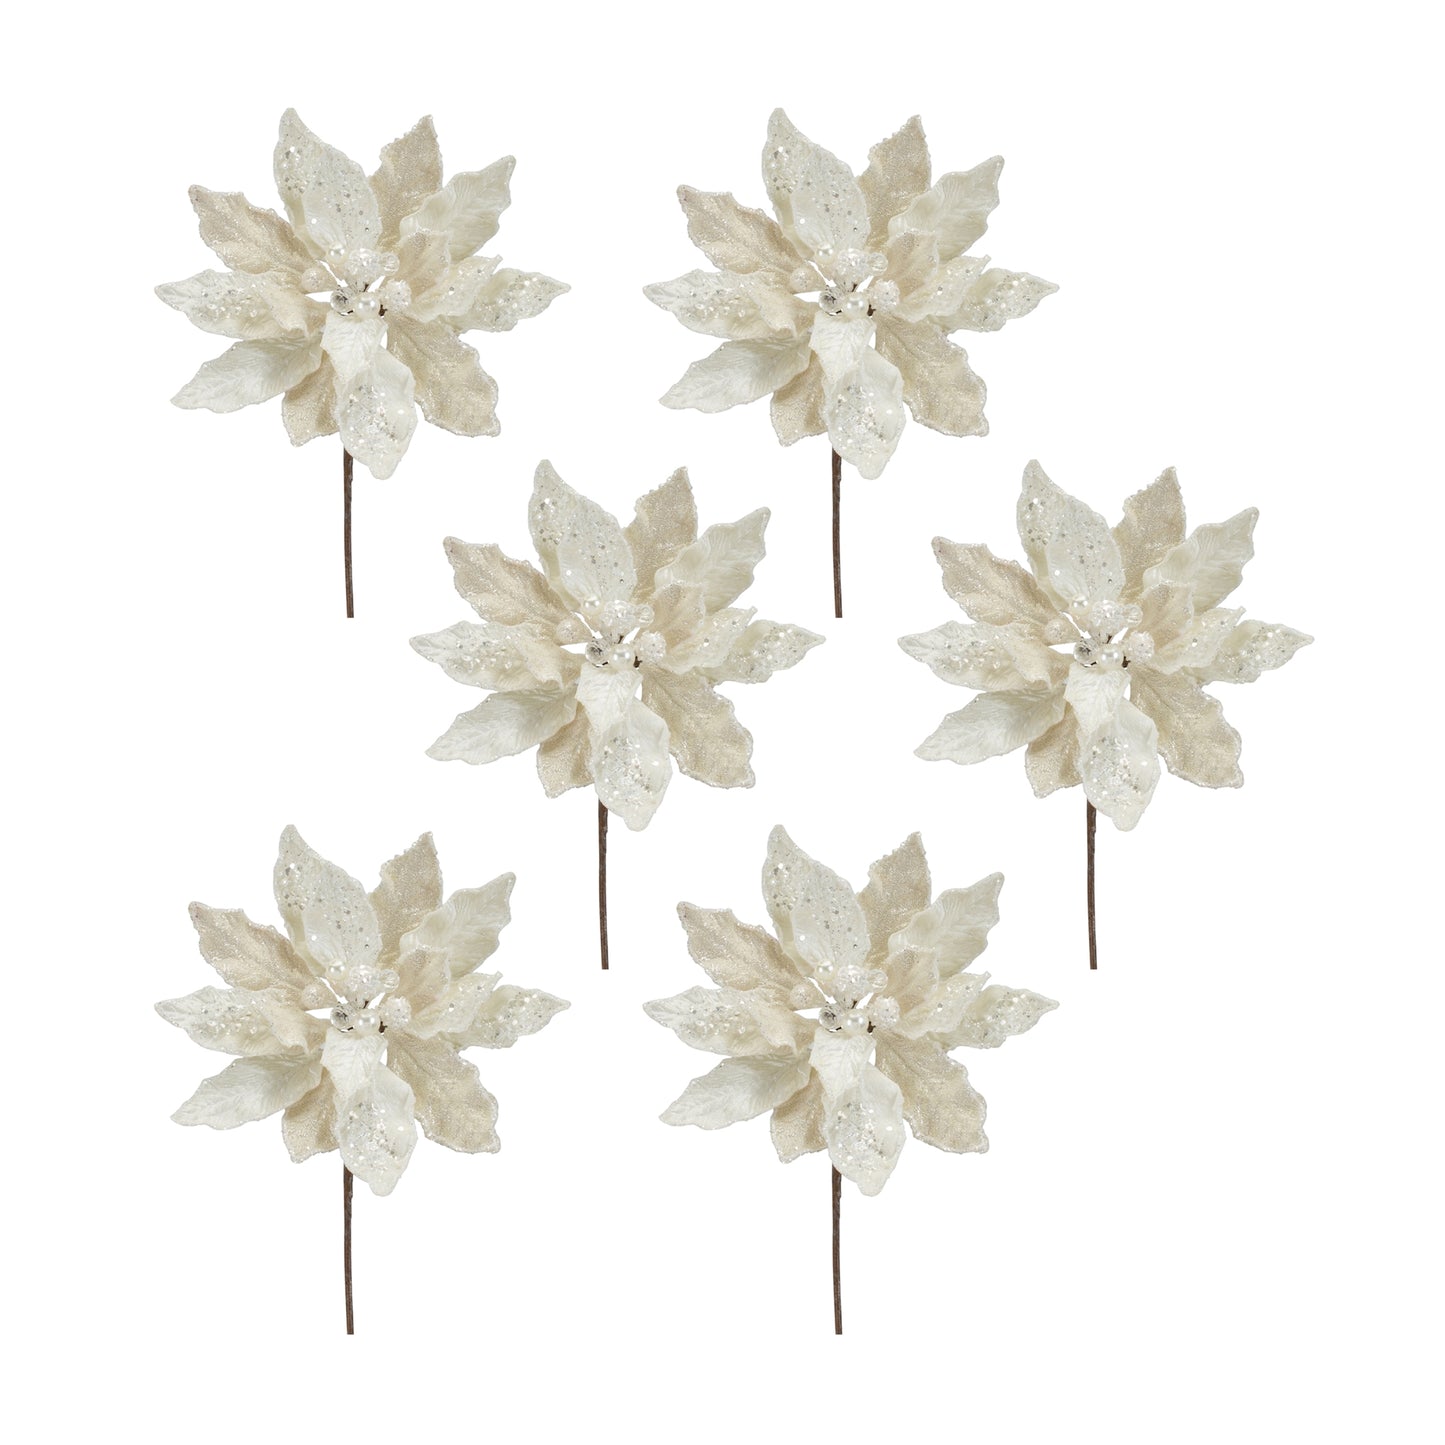 Ivory Velvet Poinsetta Stem with Gold Bead Accents (Set of 6)